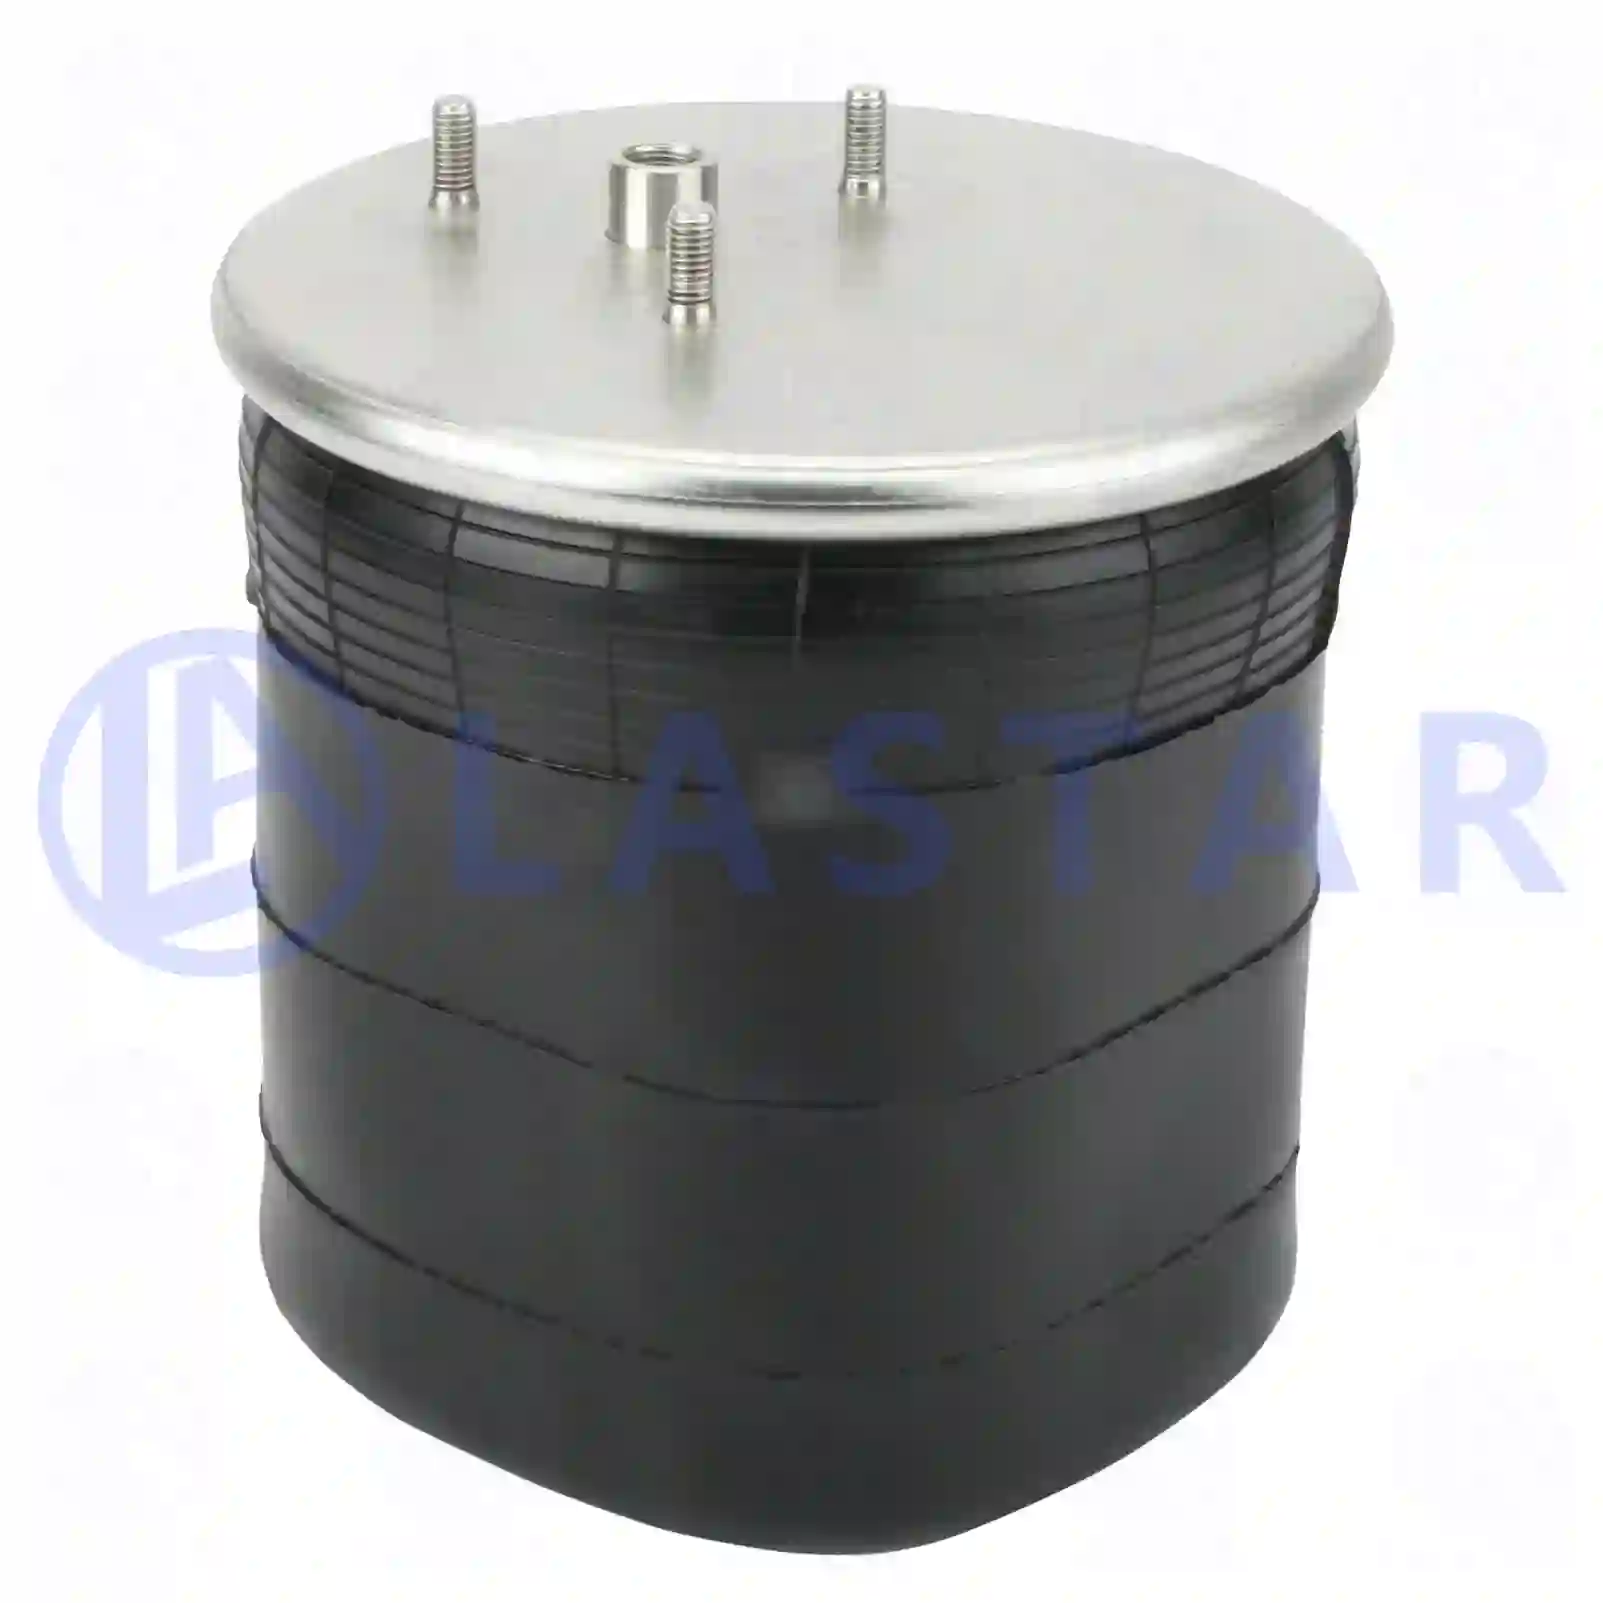 Air spring, without piston, 77727217, 1276846 ||  77727217 Lastar Spare Part | Truck Spare Parts, Auotomotive Spare Parts Air spring, without piston, 77727217, 1276846 ||  77727217 Lastar Spare Part | Truck Spare Parts, Auotomotive Spare Parts